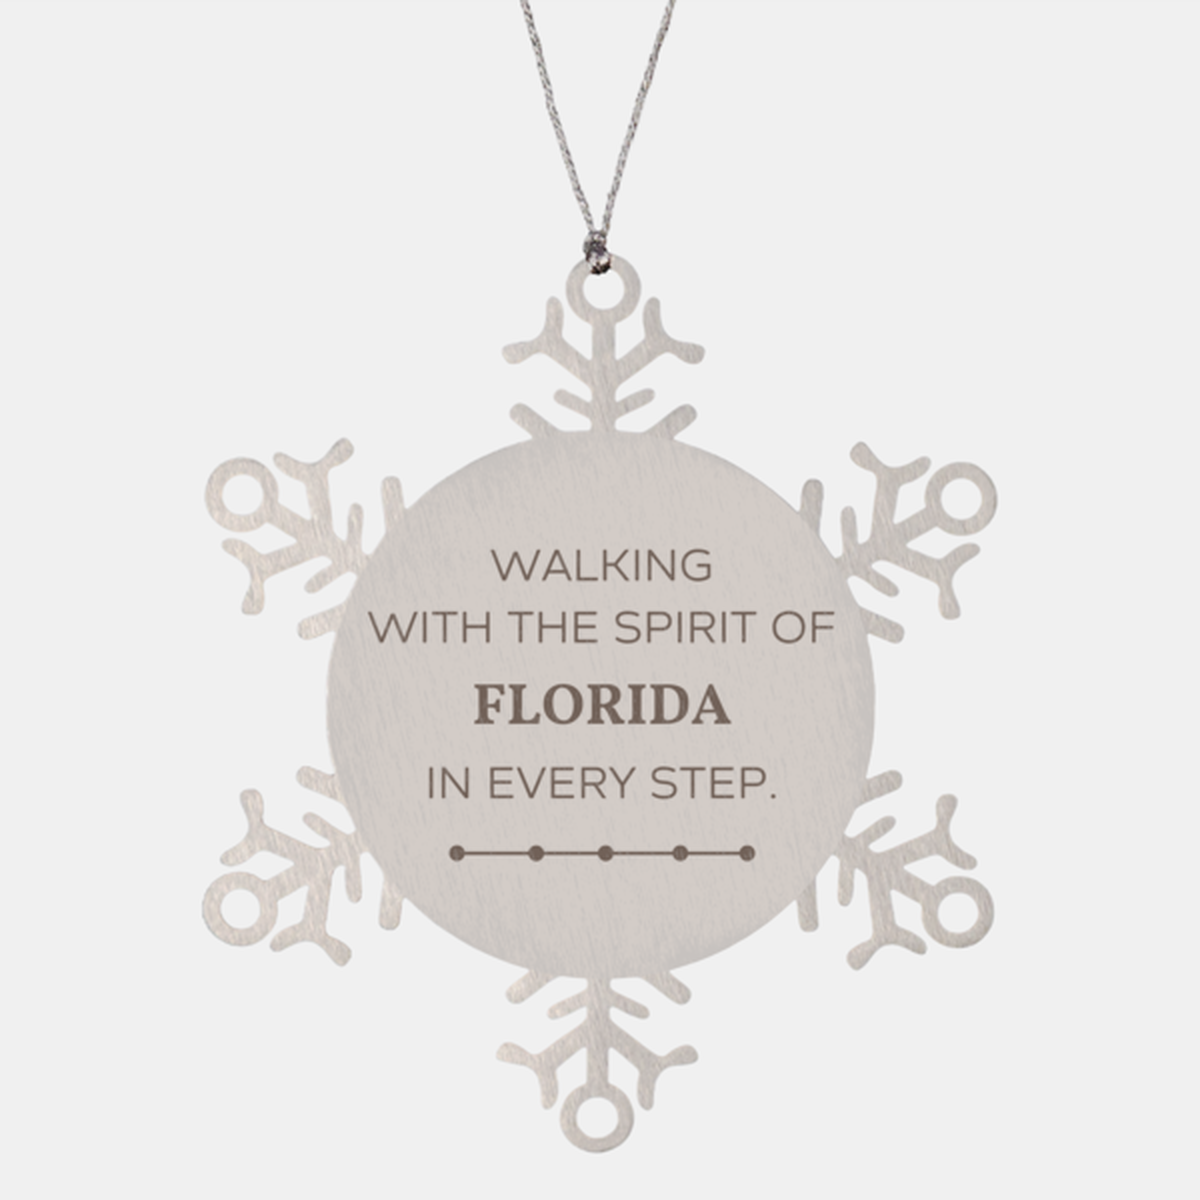 Florida Gifts, Walking with the spirit, Love Florida Birthday Christmas Snowflake Ornament For Florida People, Men, Women, Friends